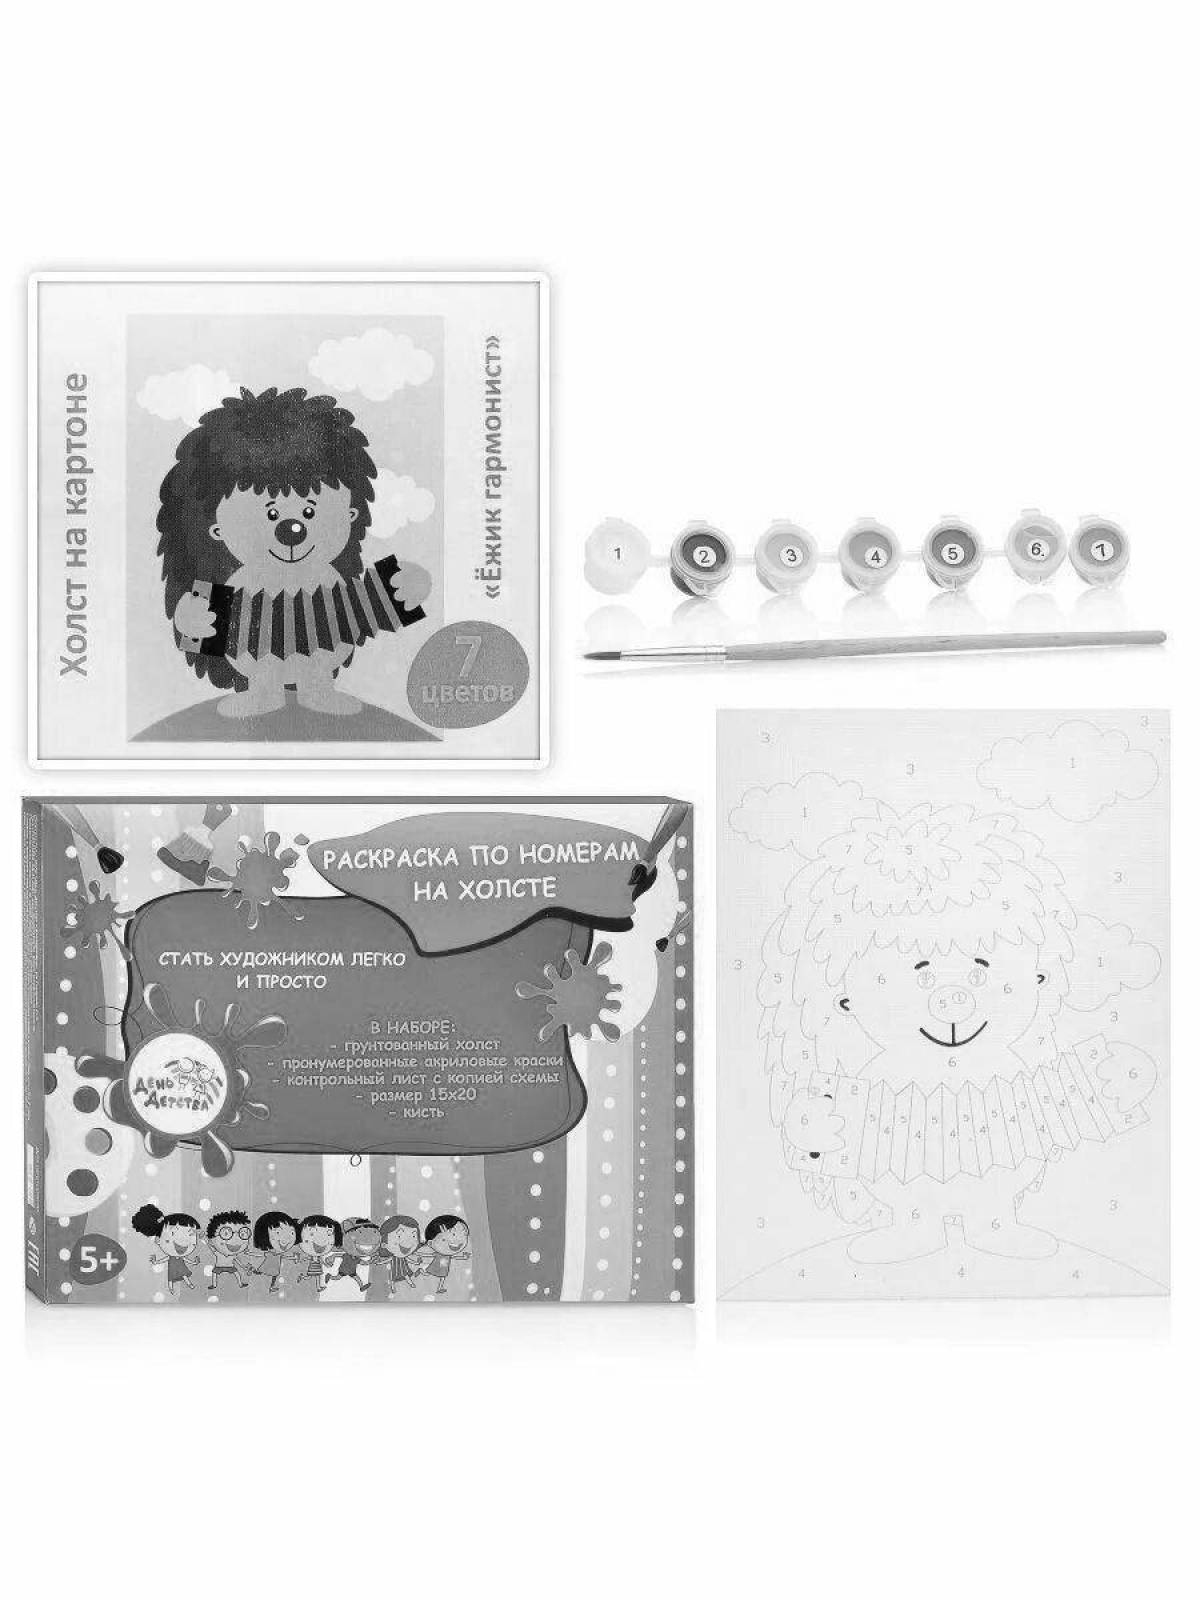 Adorable hedgehog by numbers coloring book